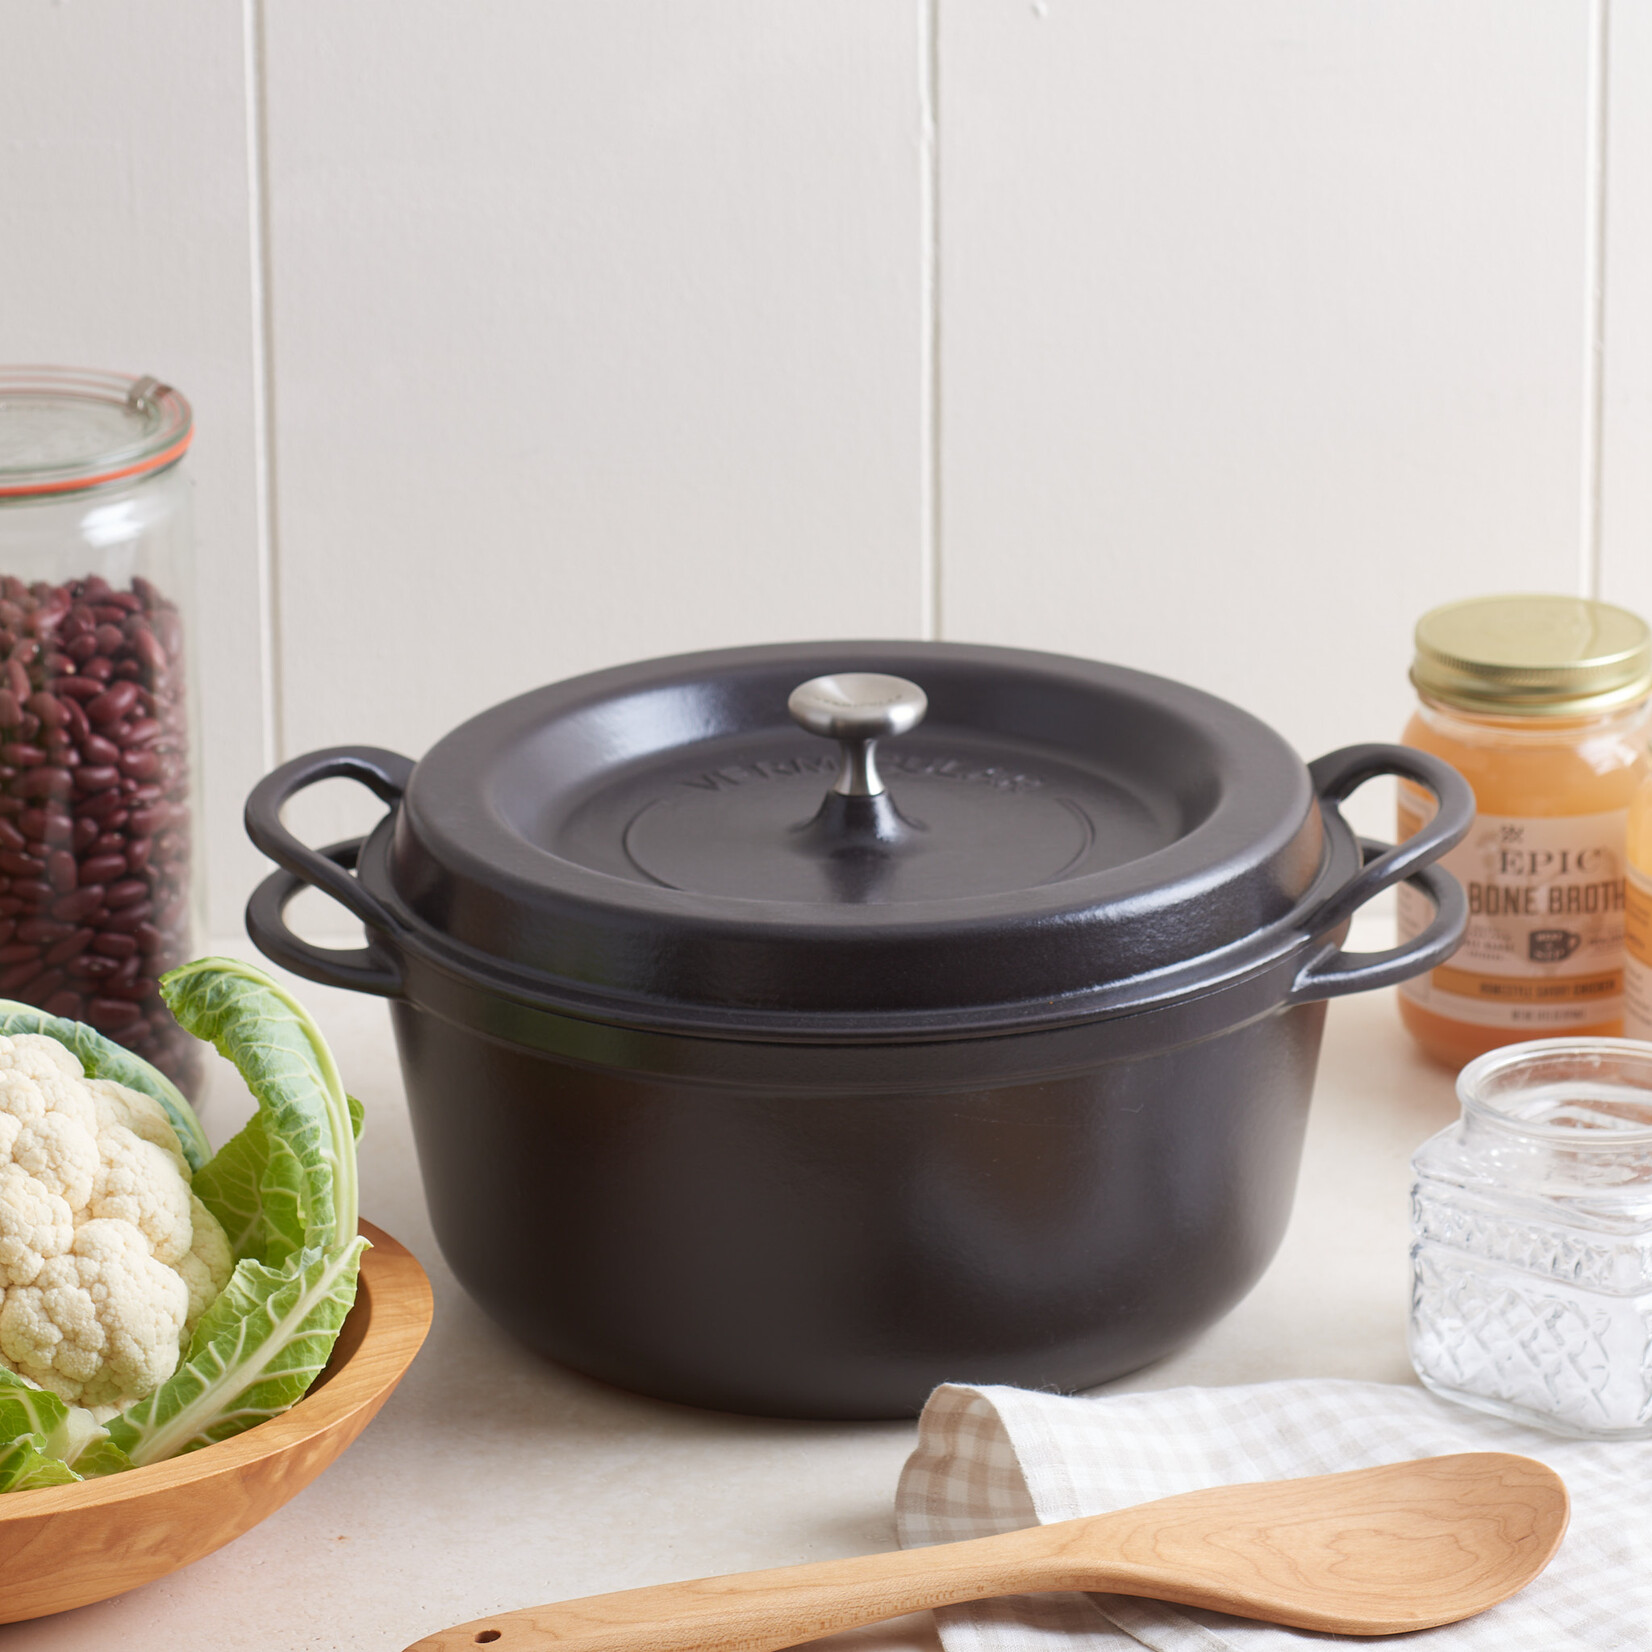 Vermicular Oven Pot - 5.3 qt | Natural Beige | Enameled Cast Iron Dutch Oven | Non-Toxic | Made in Japan